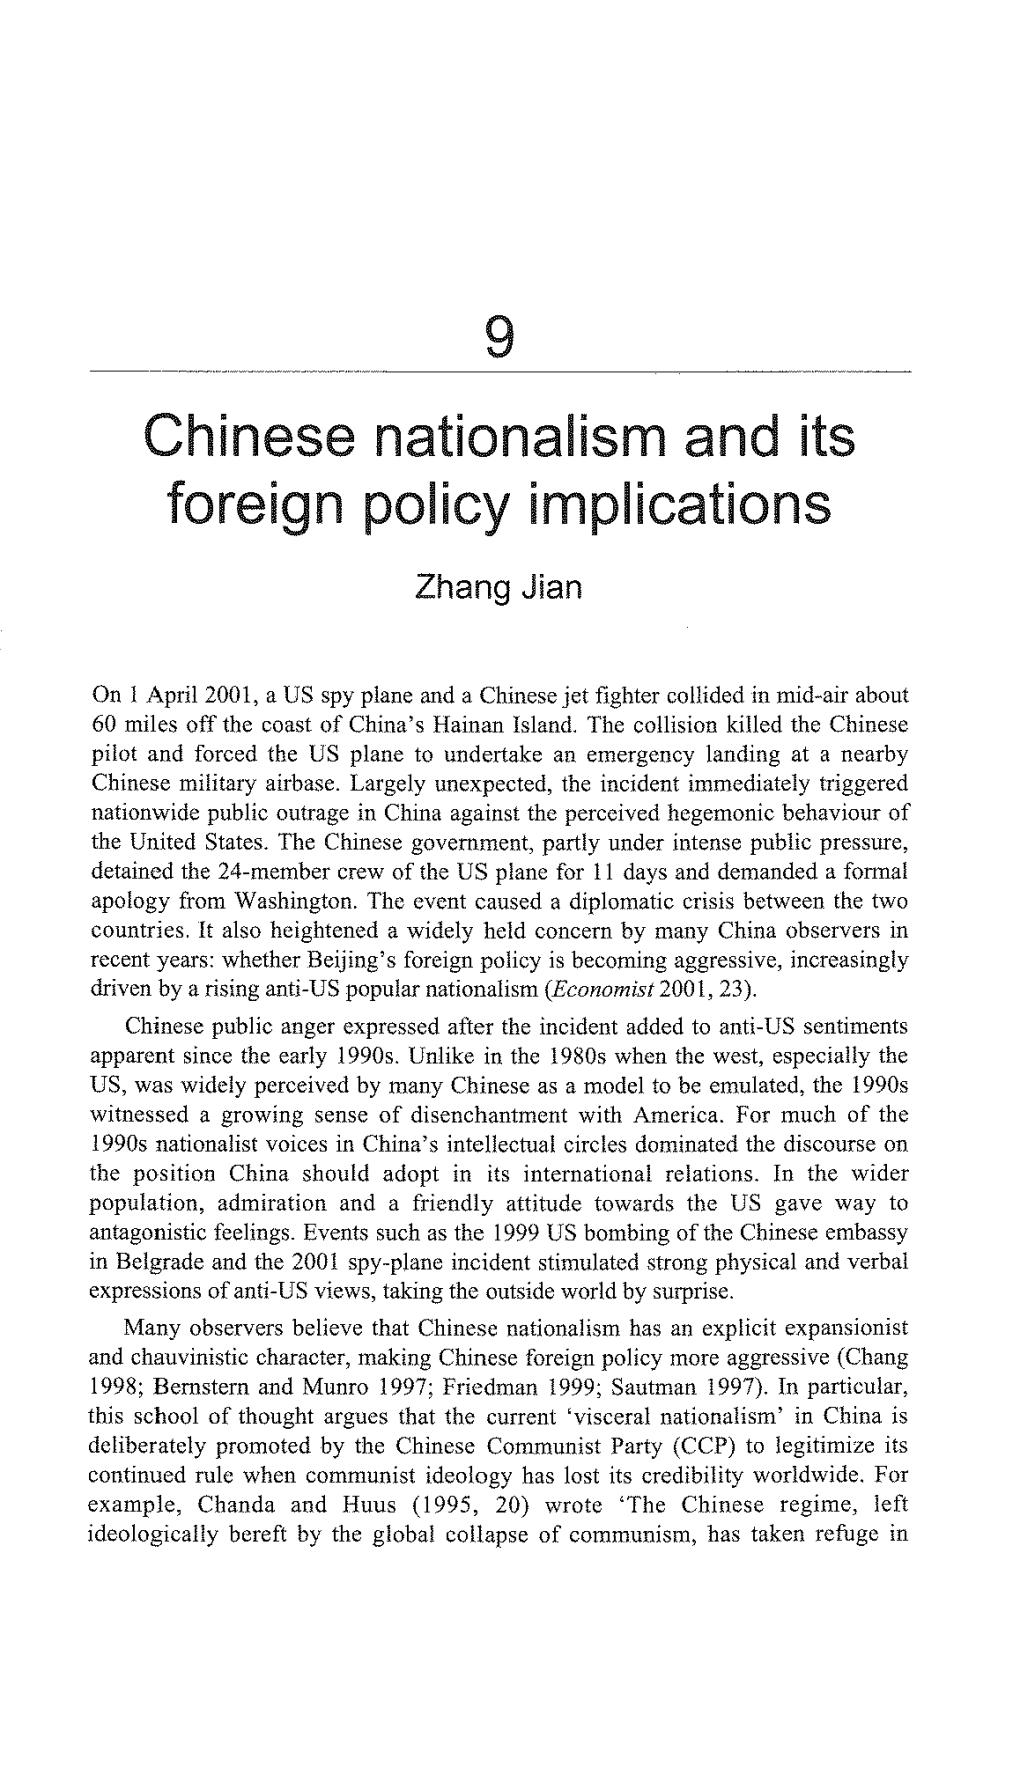 Chinese Nationalism and Its Foreign Policy Implications